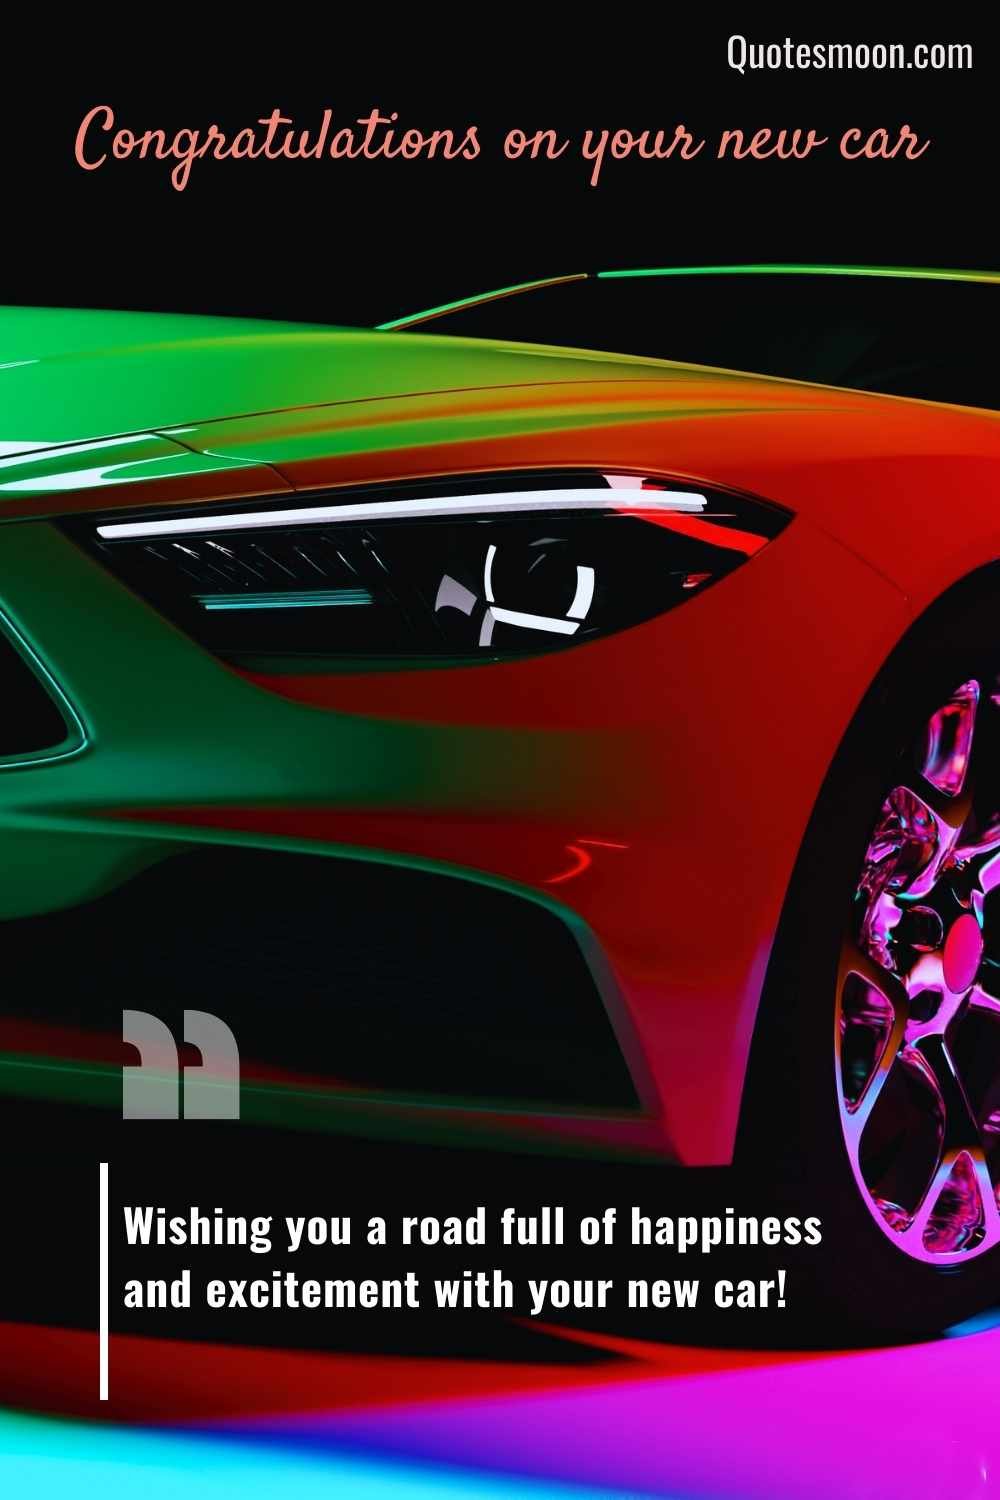 buying a new car congratulations message with HD images